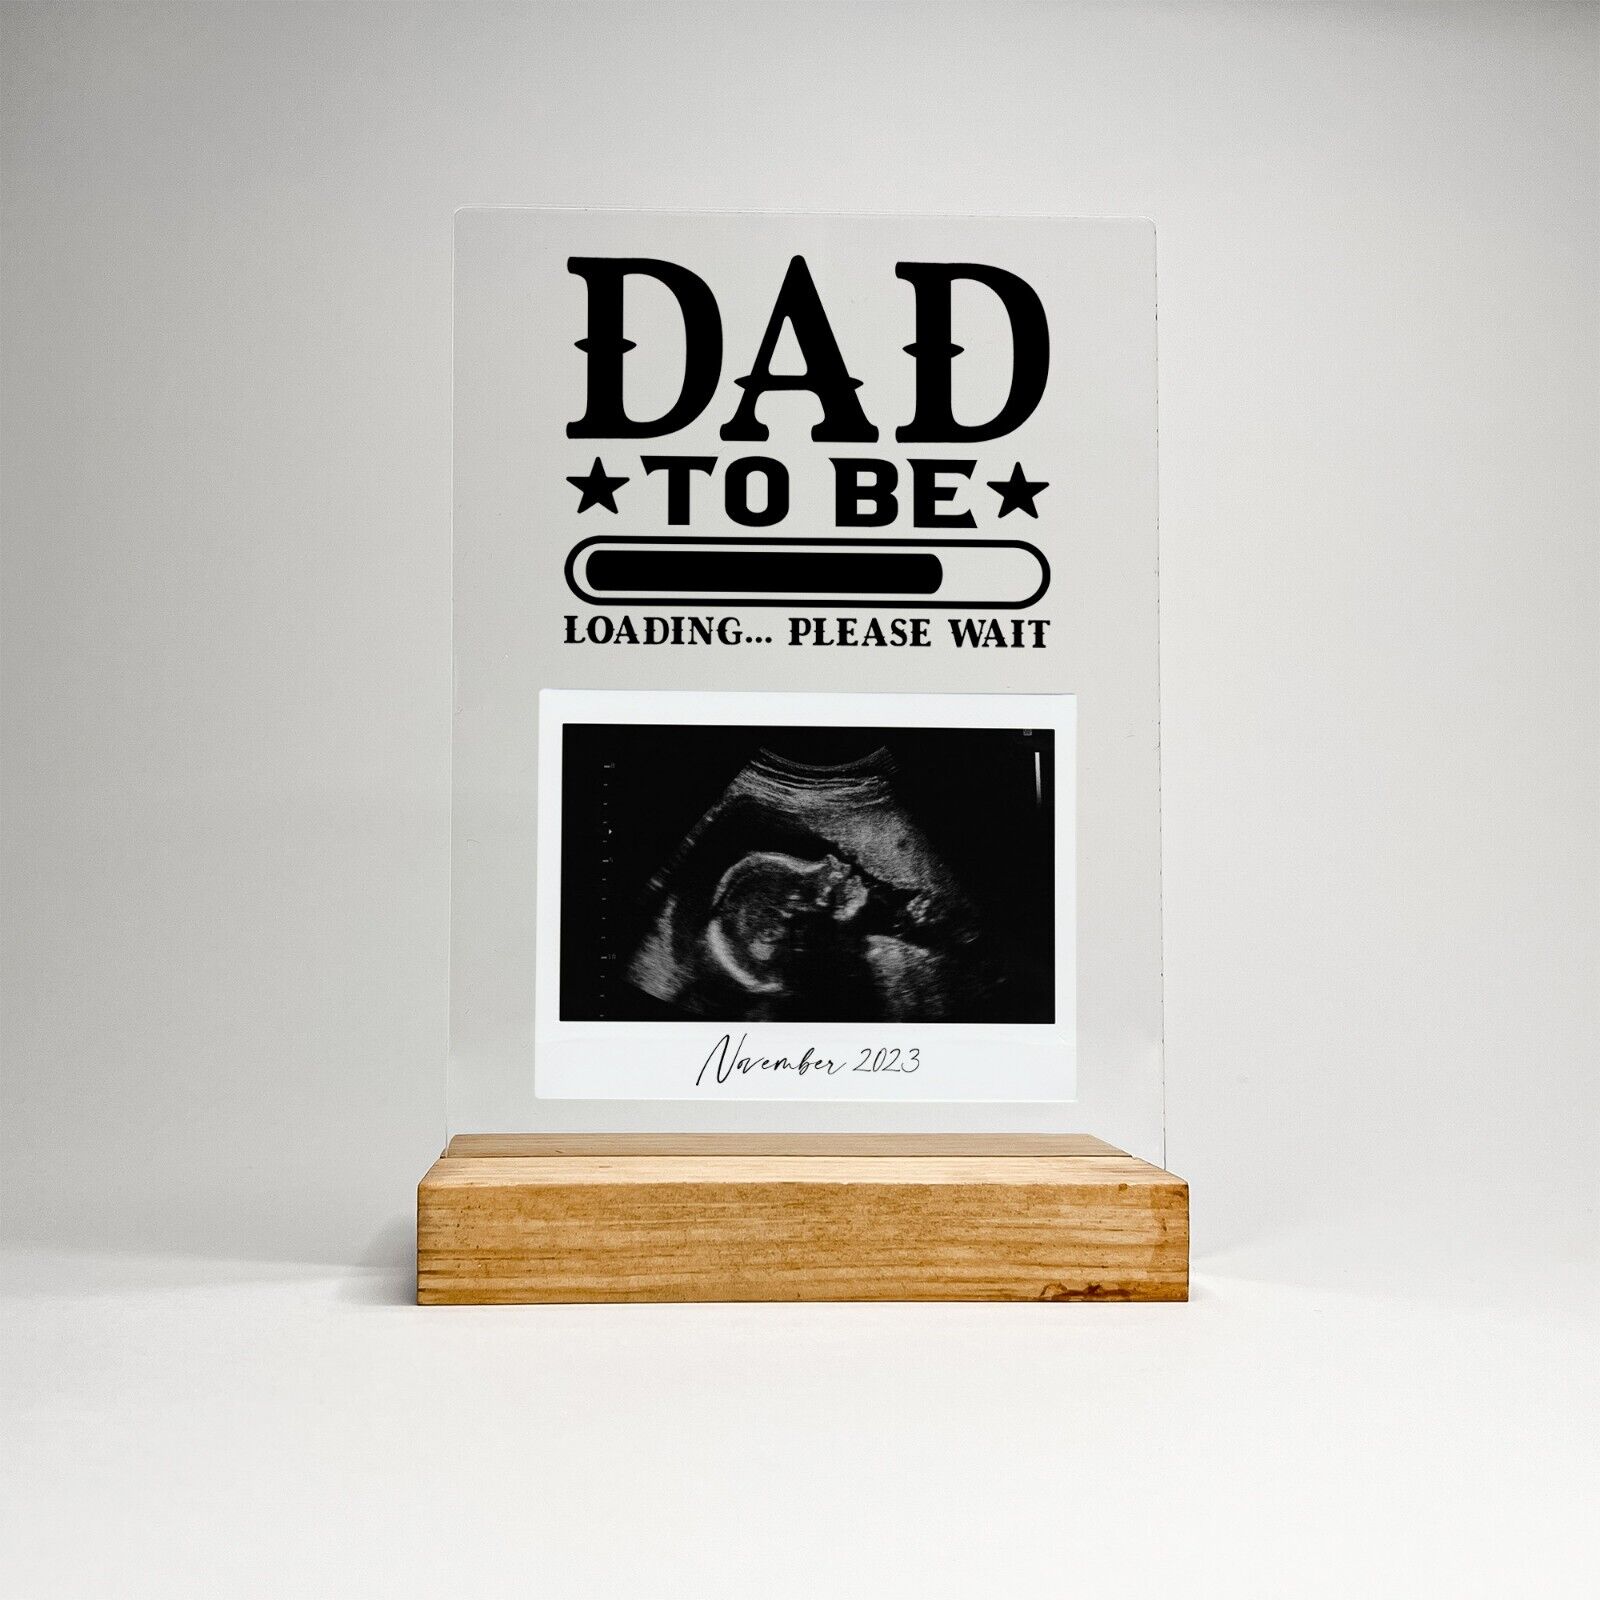 Personalized Wood Base Desk Table Stand Dad to Be, New Father, Pregnancy Gift